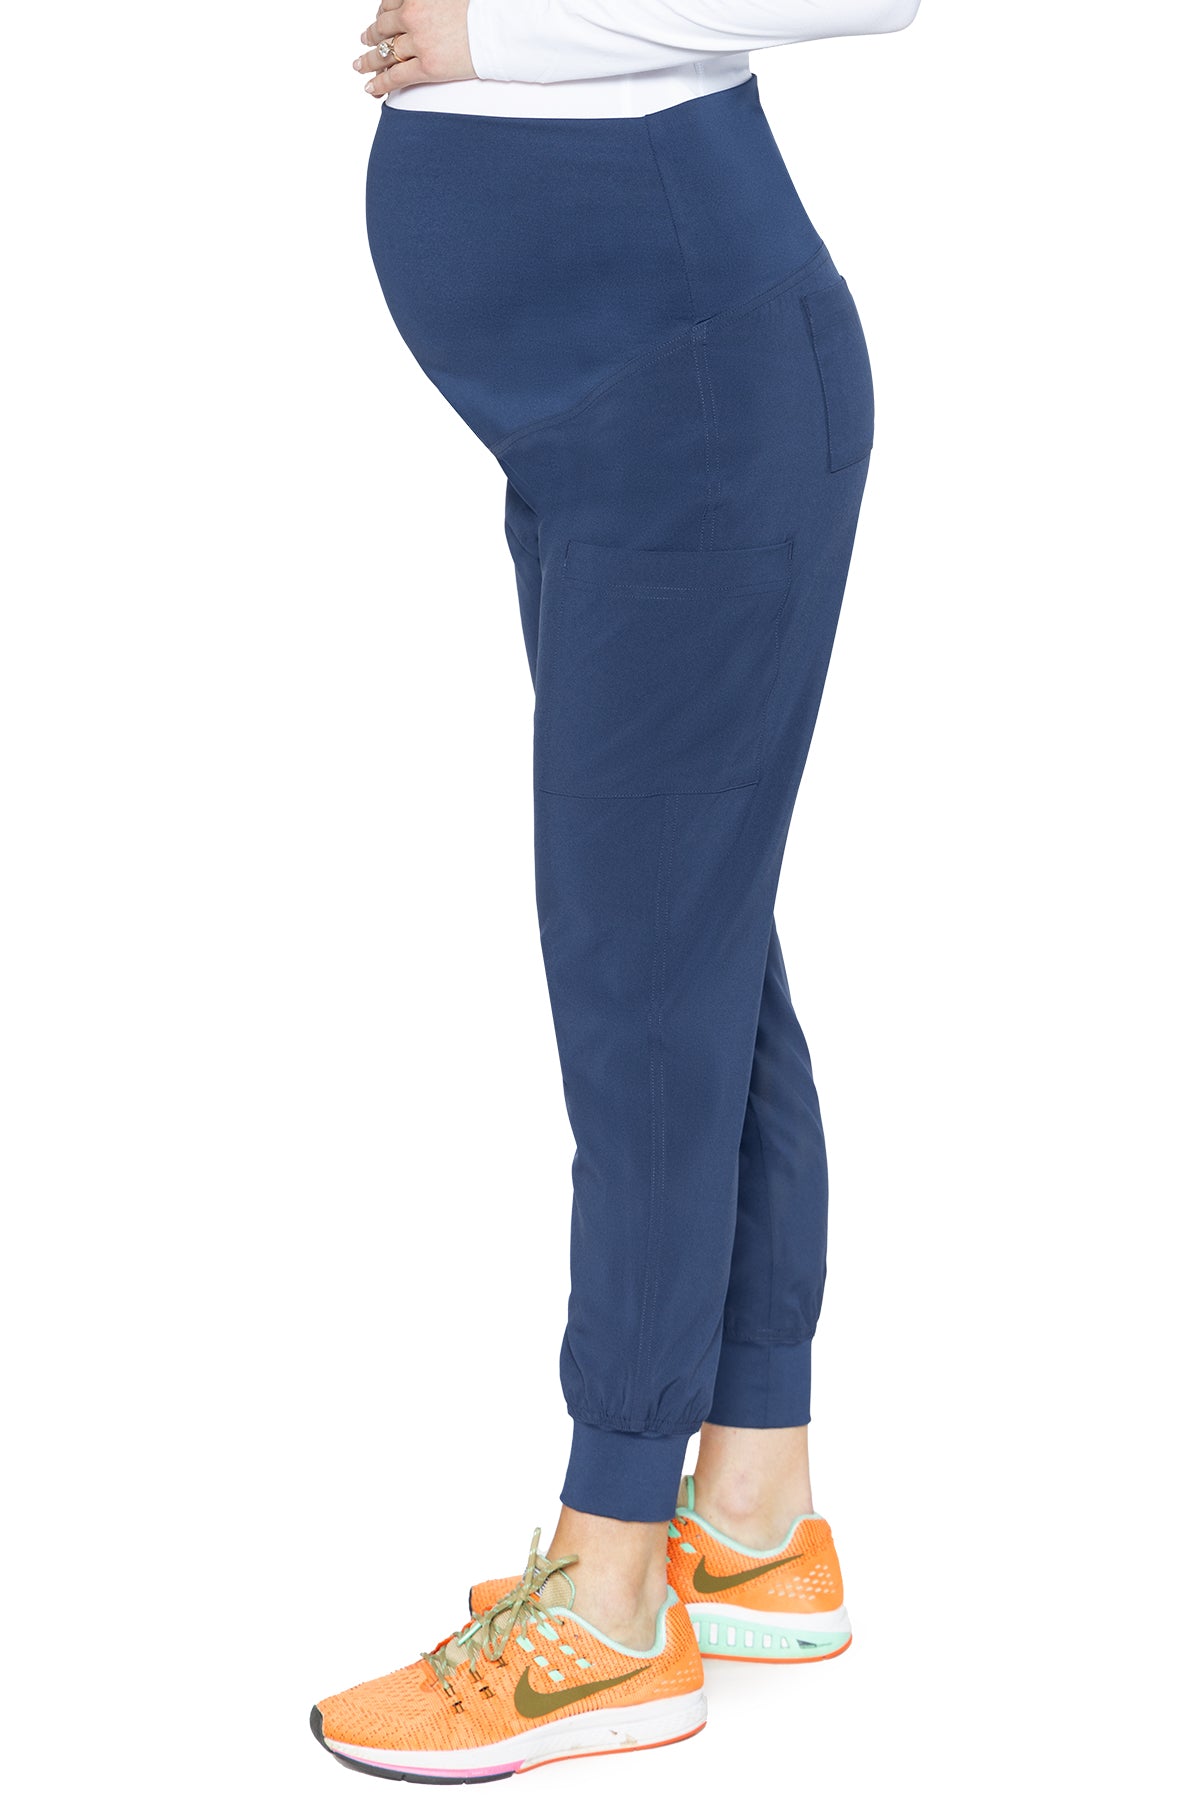 Med Couture Plus One 8729 Maternity Jogger Pant - PETITE Navy Side 